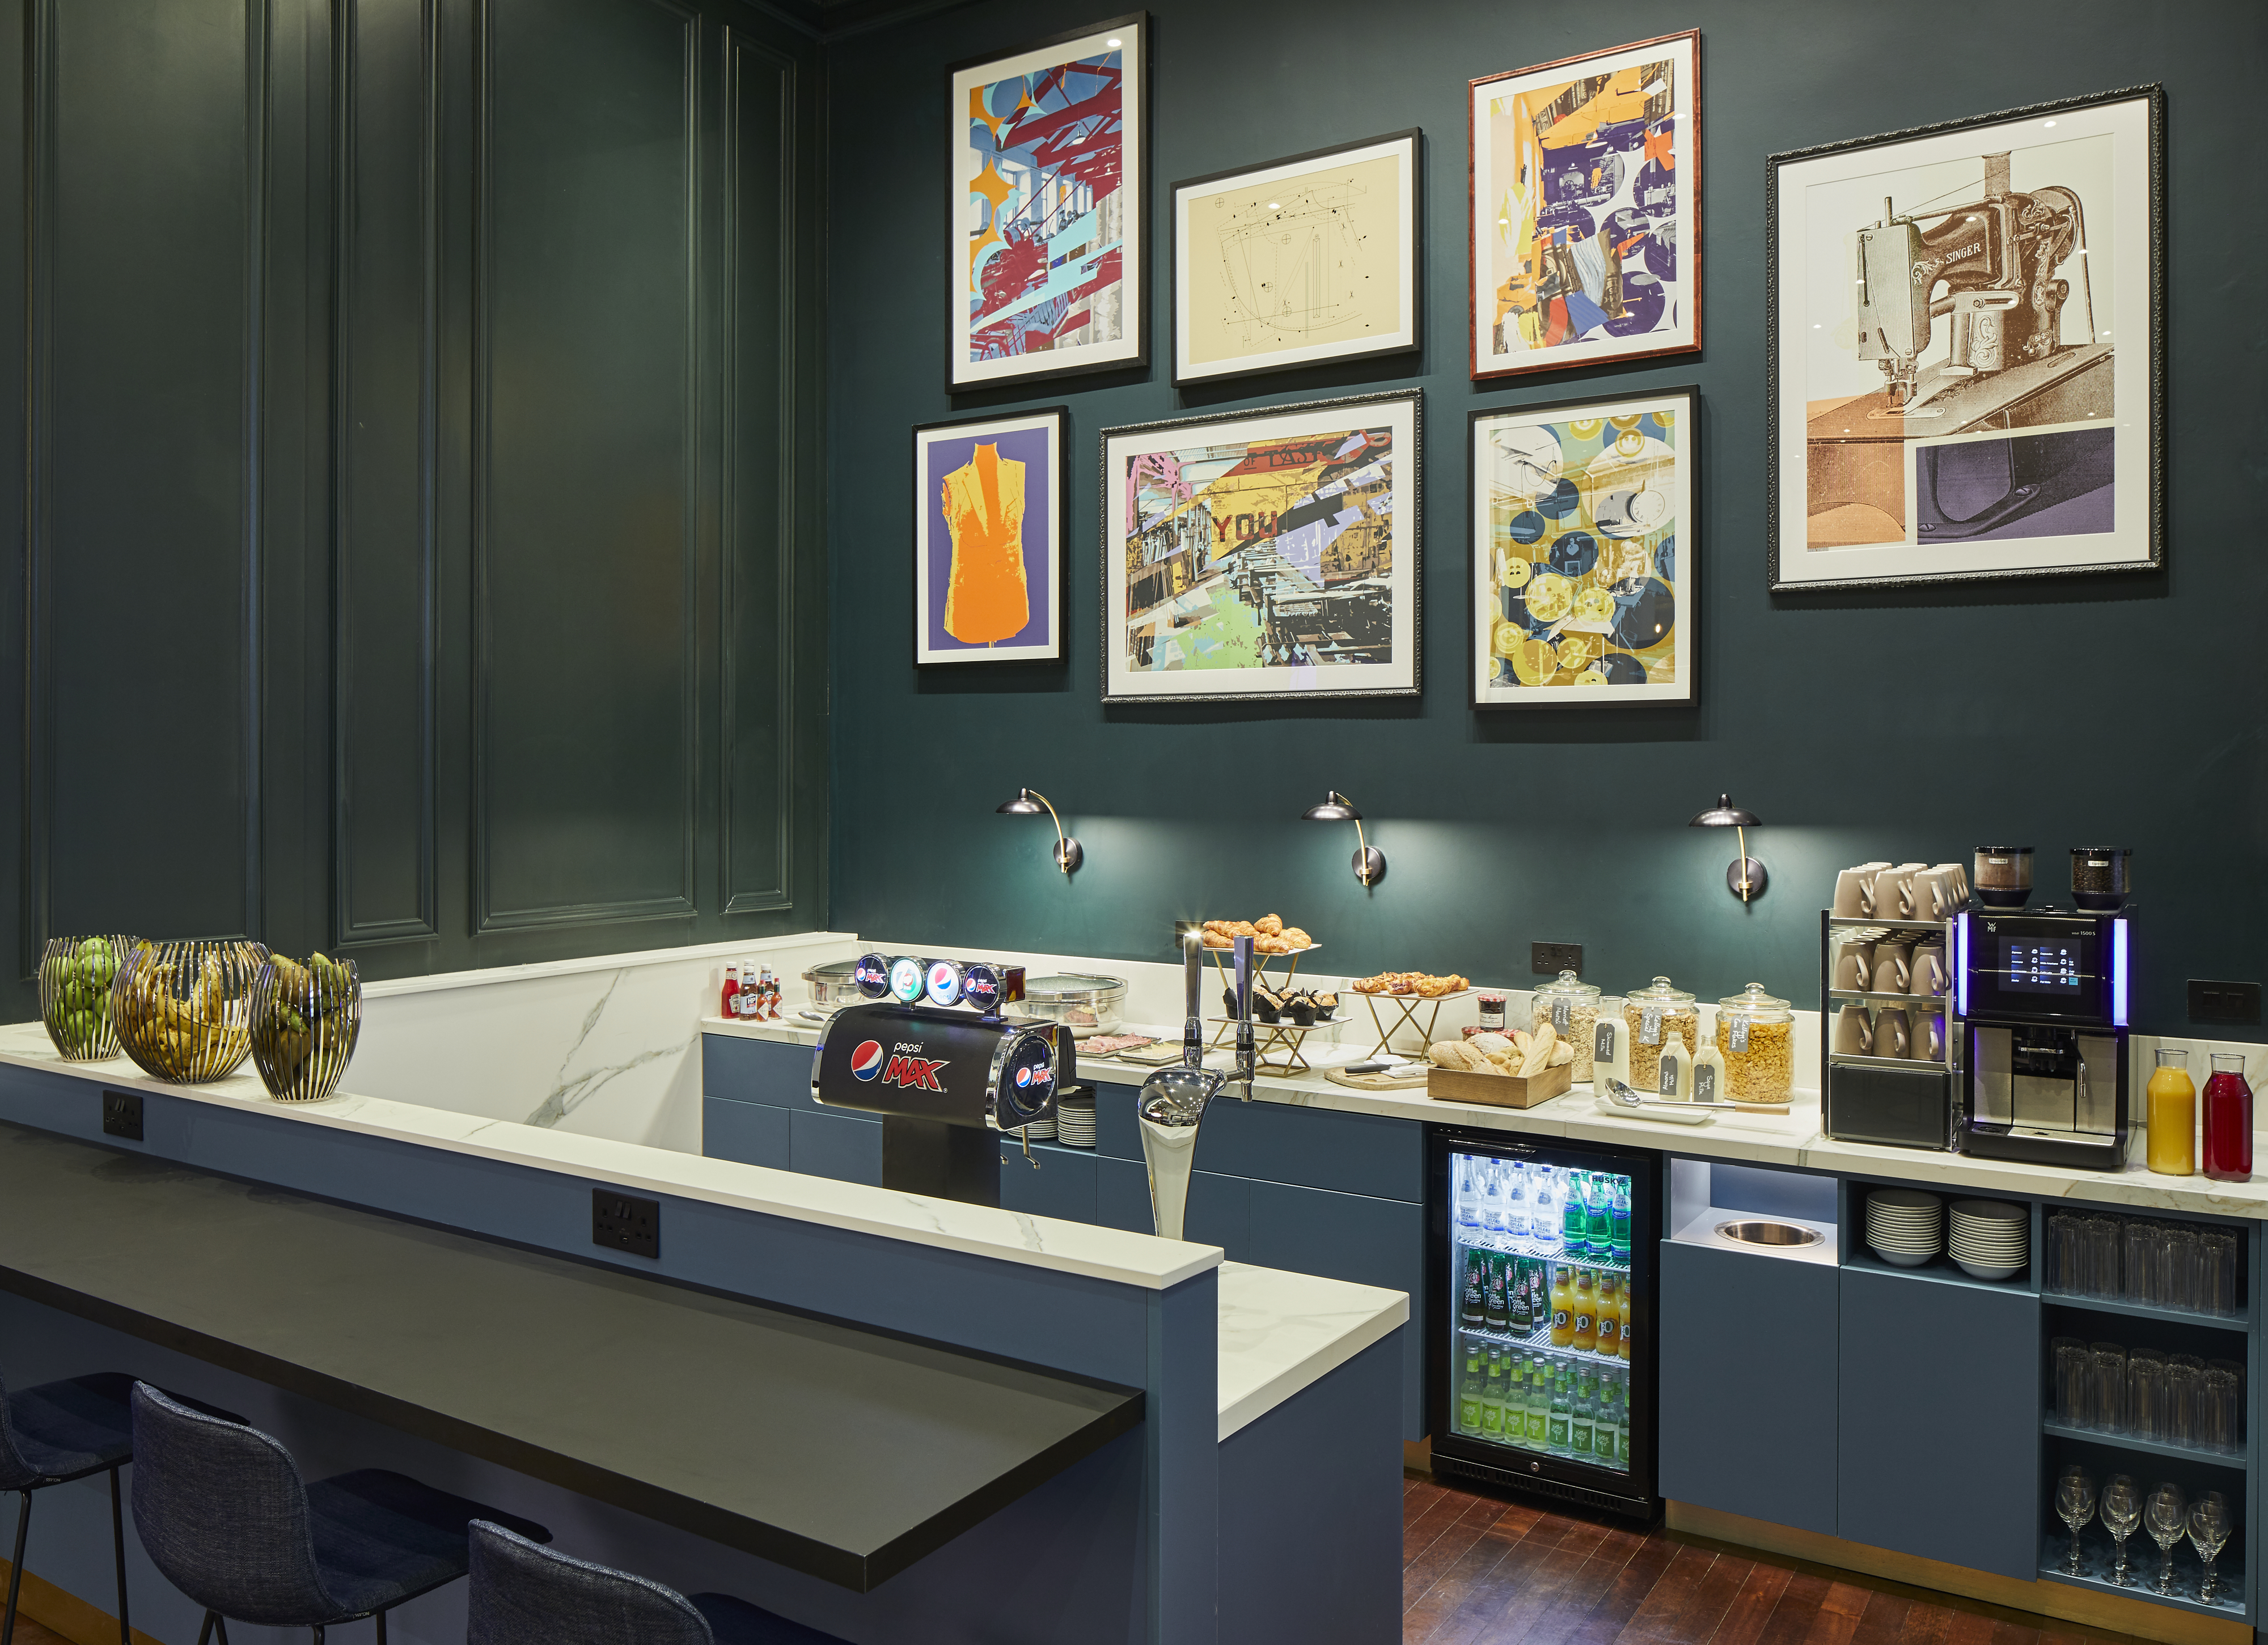 Counter displaying snacks and beverages in front of dark green wall with framed art pieces